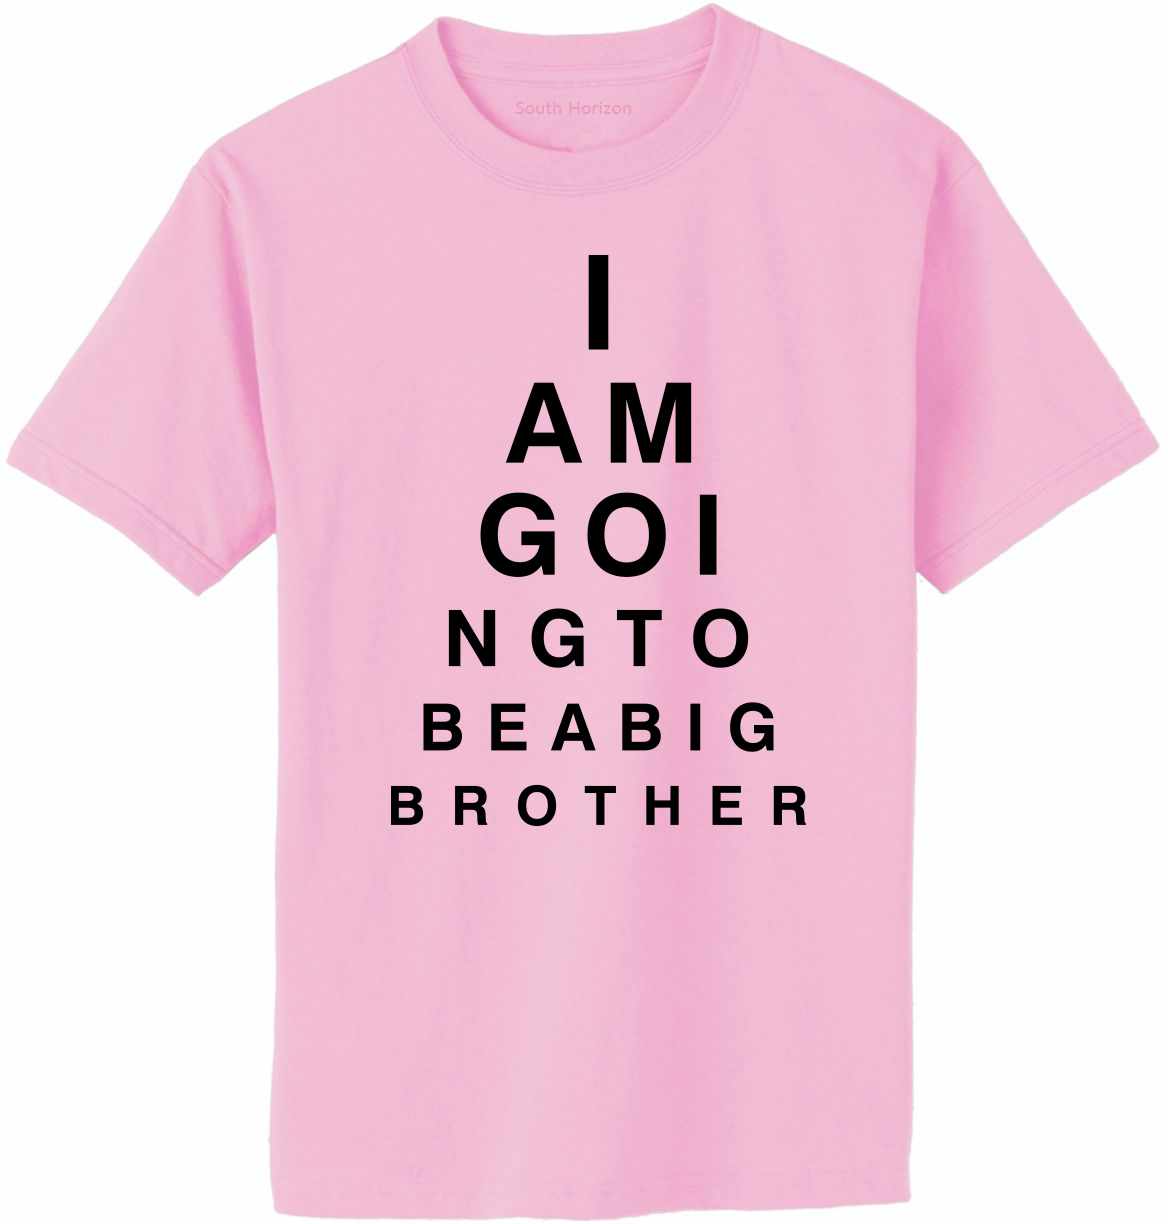 I AM GOING TO BE BIG BROTHER EYE CHART Adult T-Shirt (#1007-1)